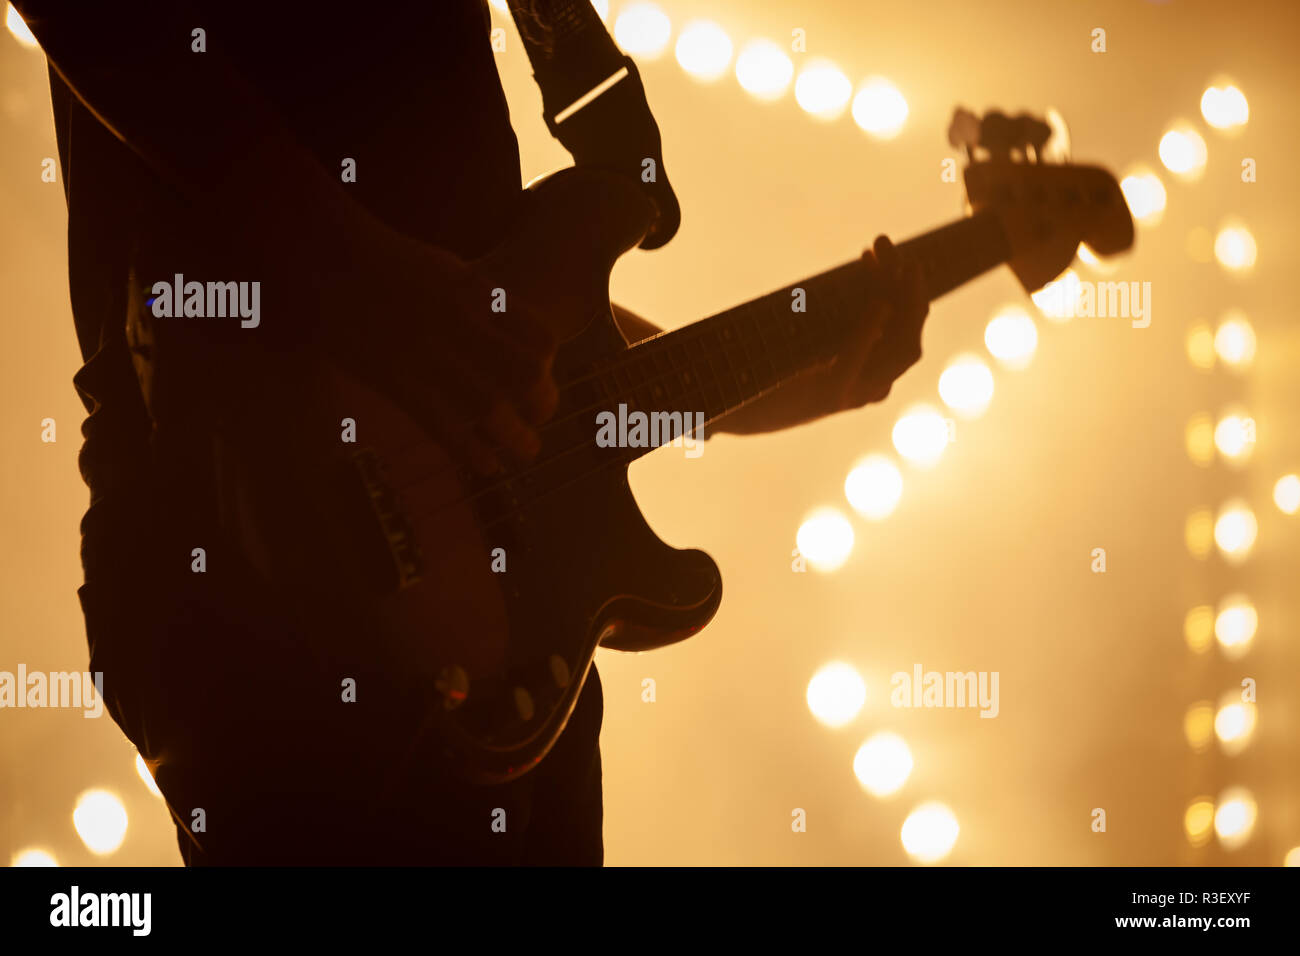 Electric bass guitar player in stage strobe lights, close-up silhouette photo with soft selective focus Stock Photo